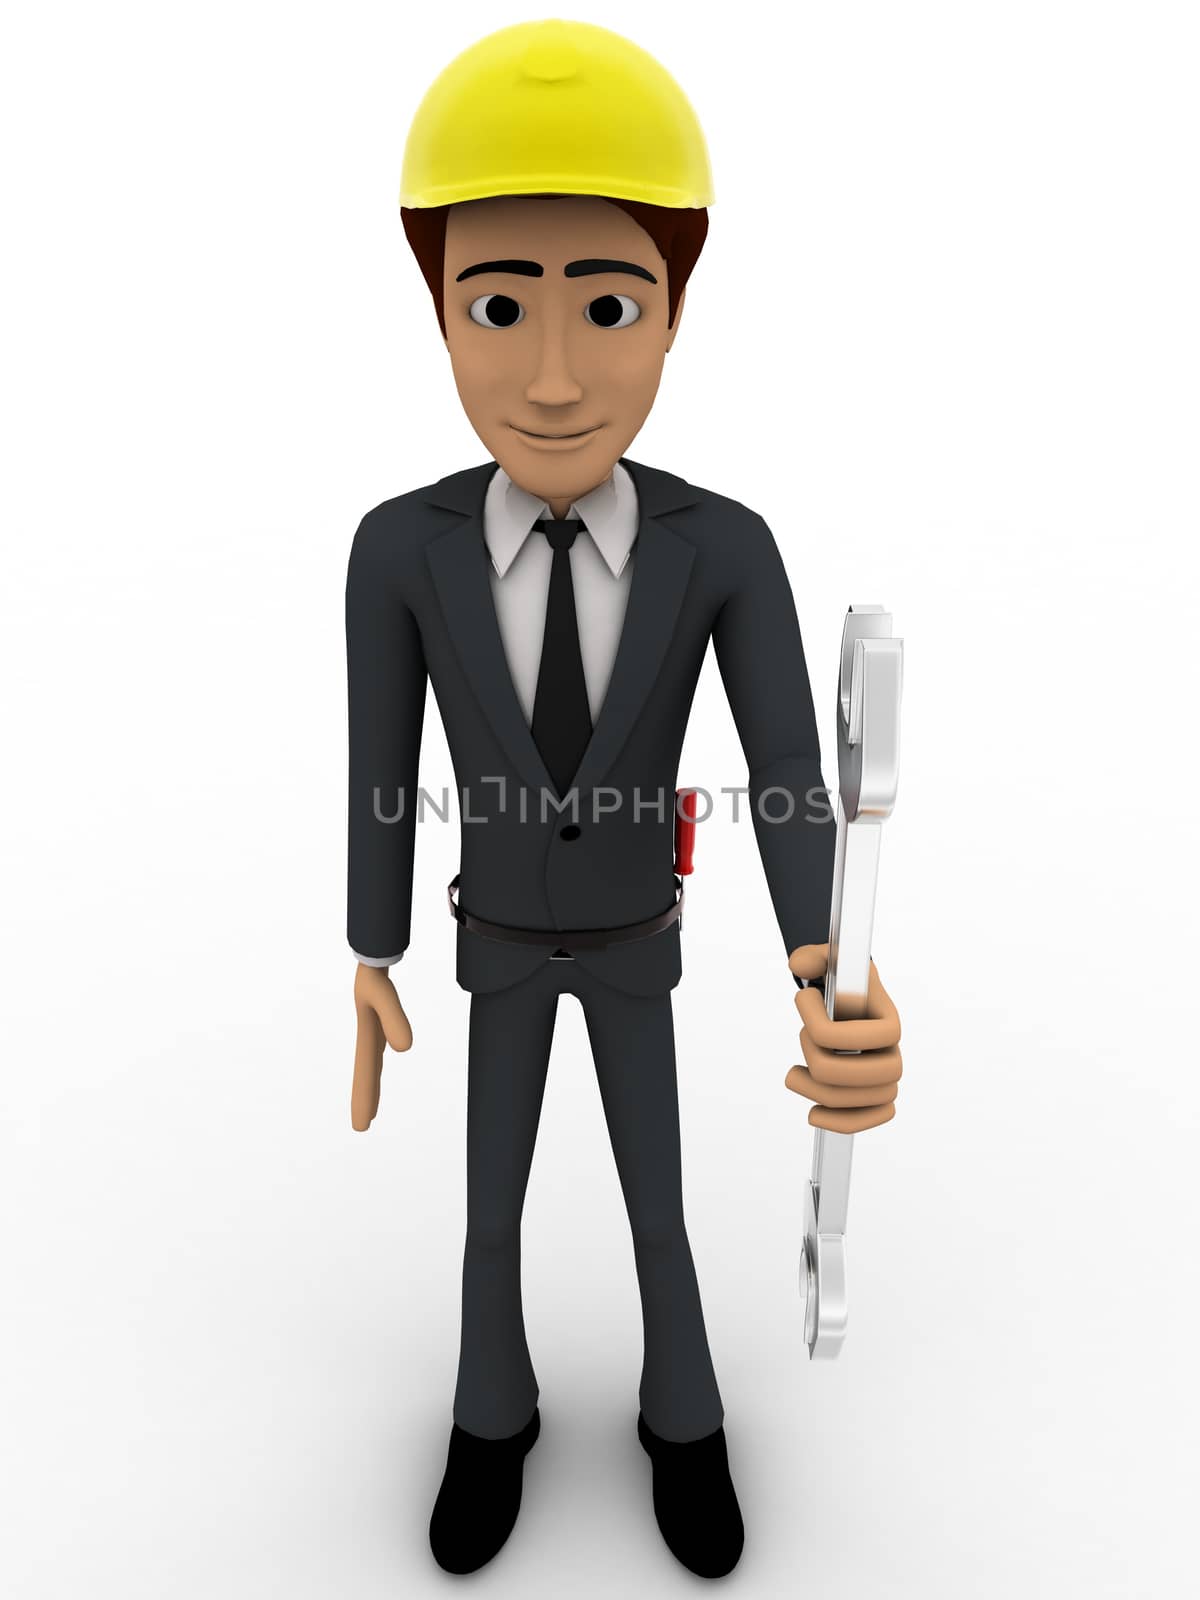 3d man standing with wrench in hand concept on white background, front angle view